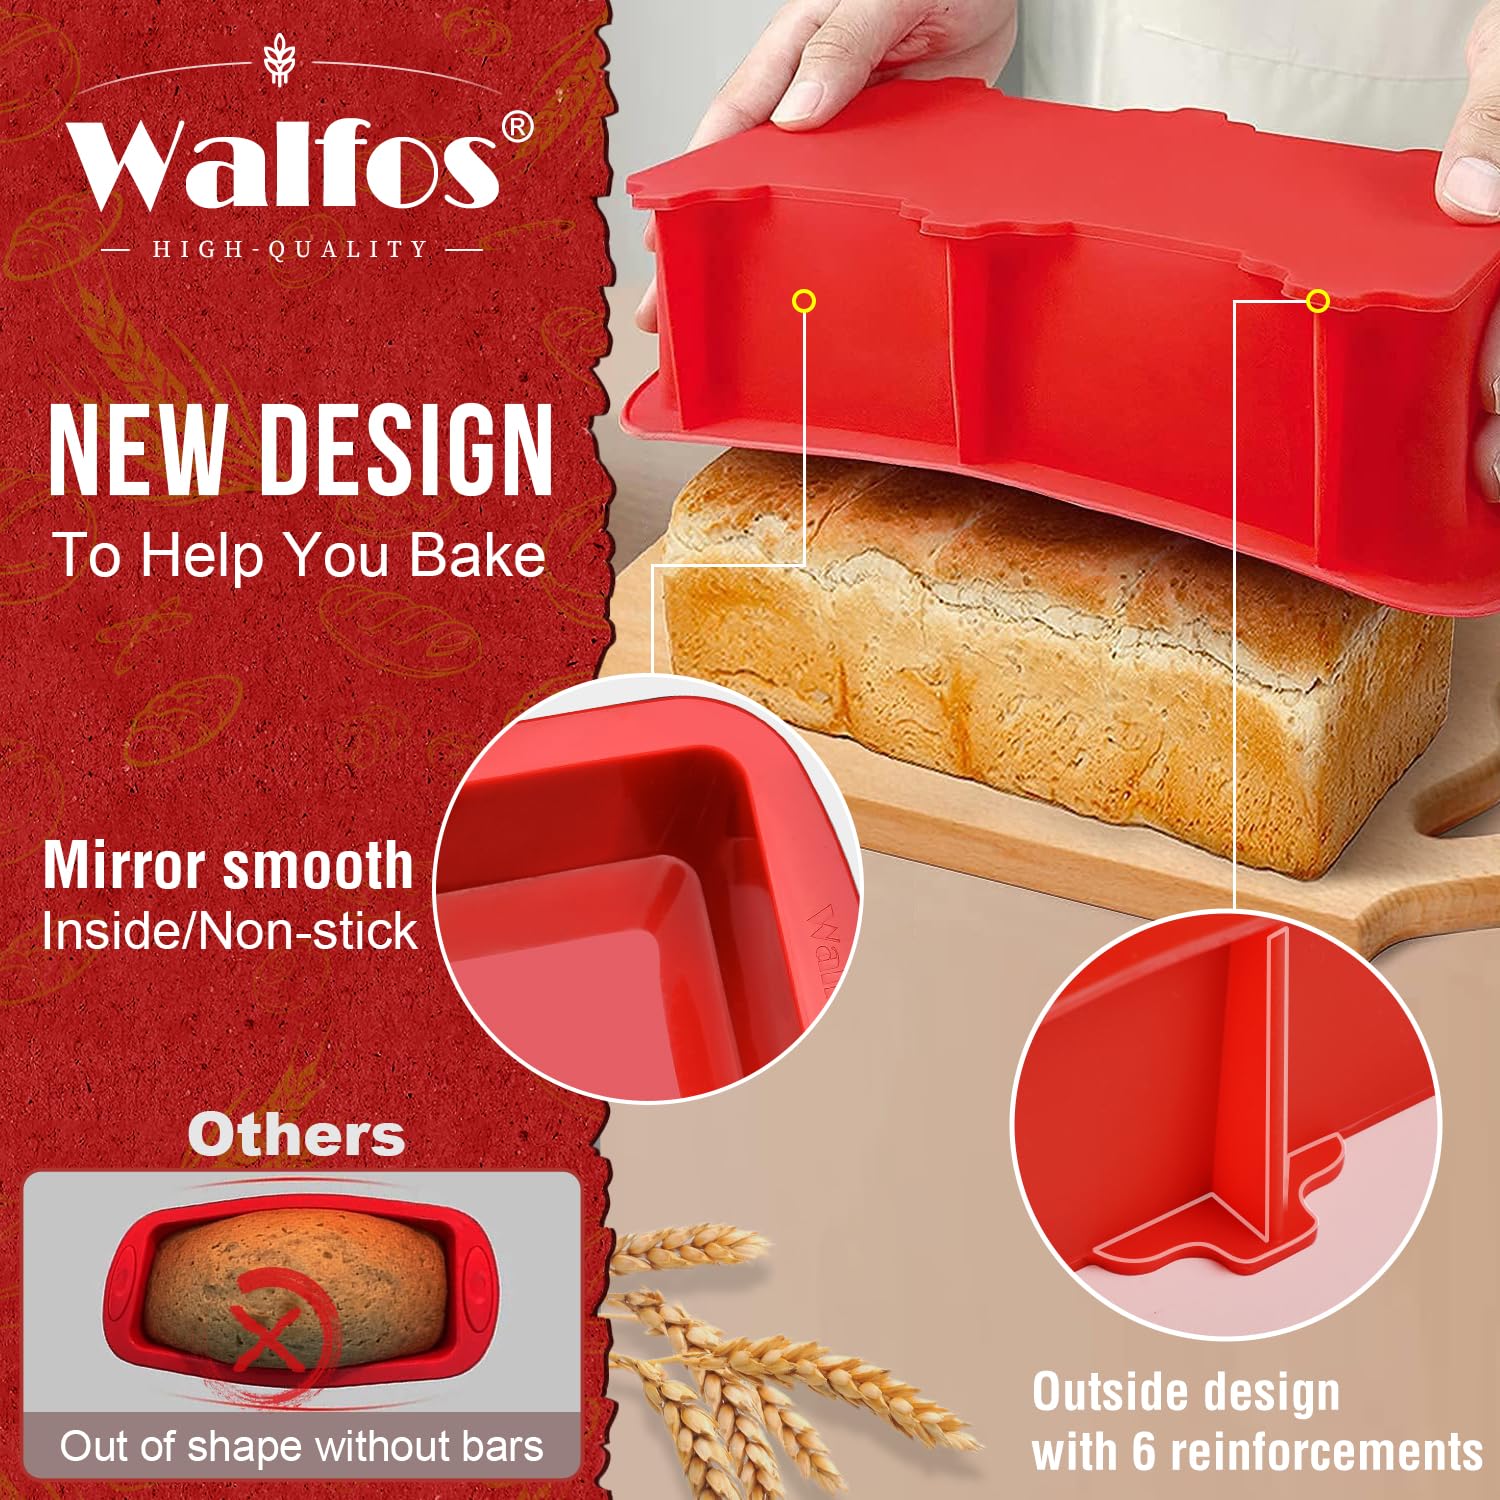 Walfos Silicone Bread Loaf Pan，9 x 5 inch Non-Stick Silicone Loaf Pans For Baking Set of 2，Perfect For Bread, Cake, Meatloaf, BPA Free and Dishwasher Safe